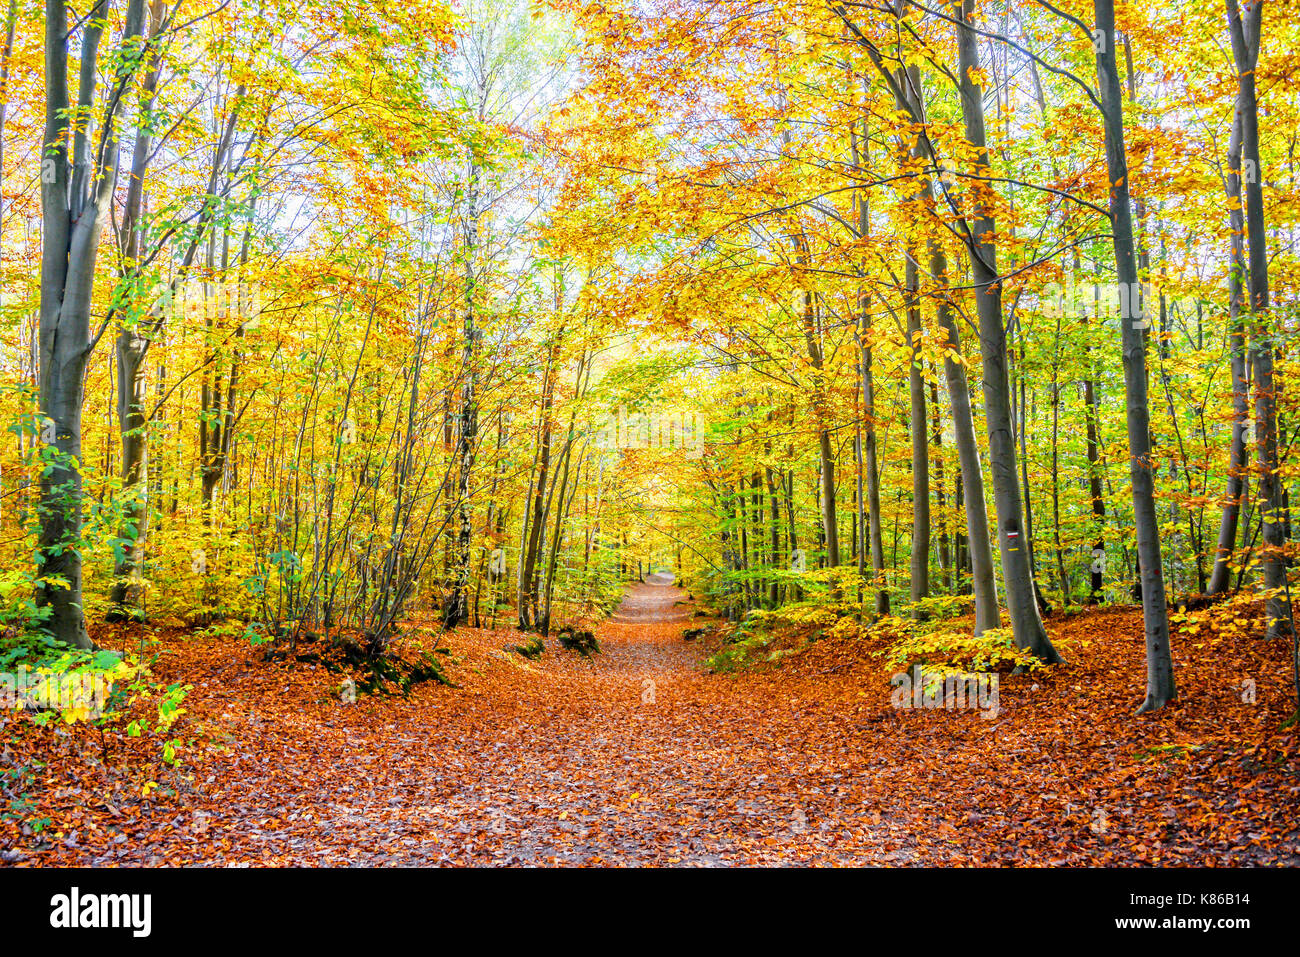 Footpath in a forest in autumn Stock Photo